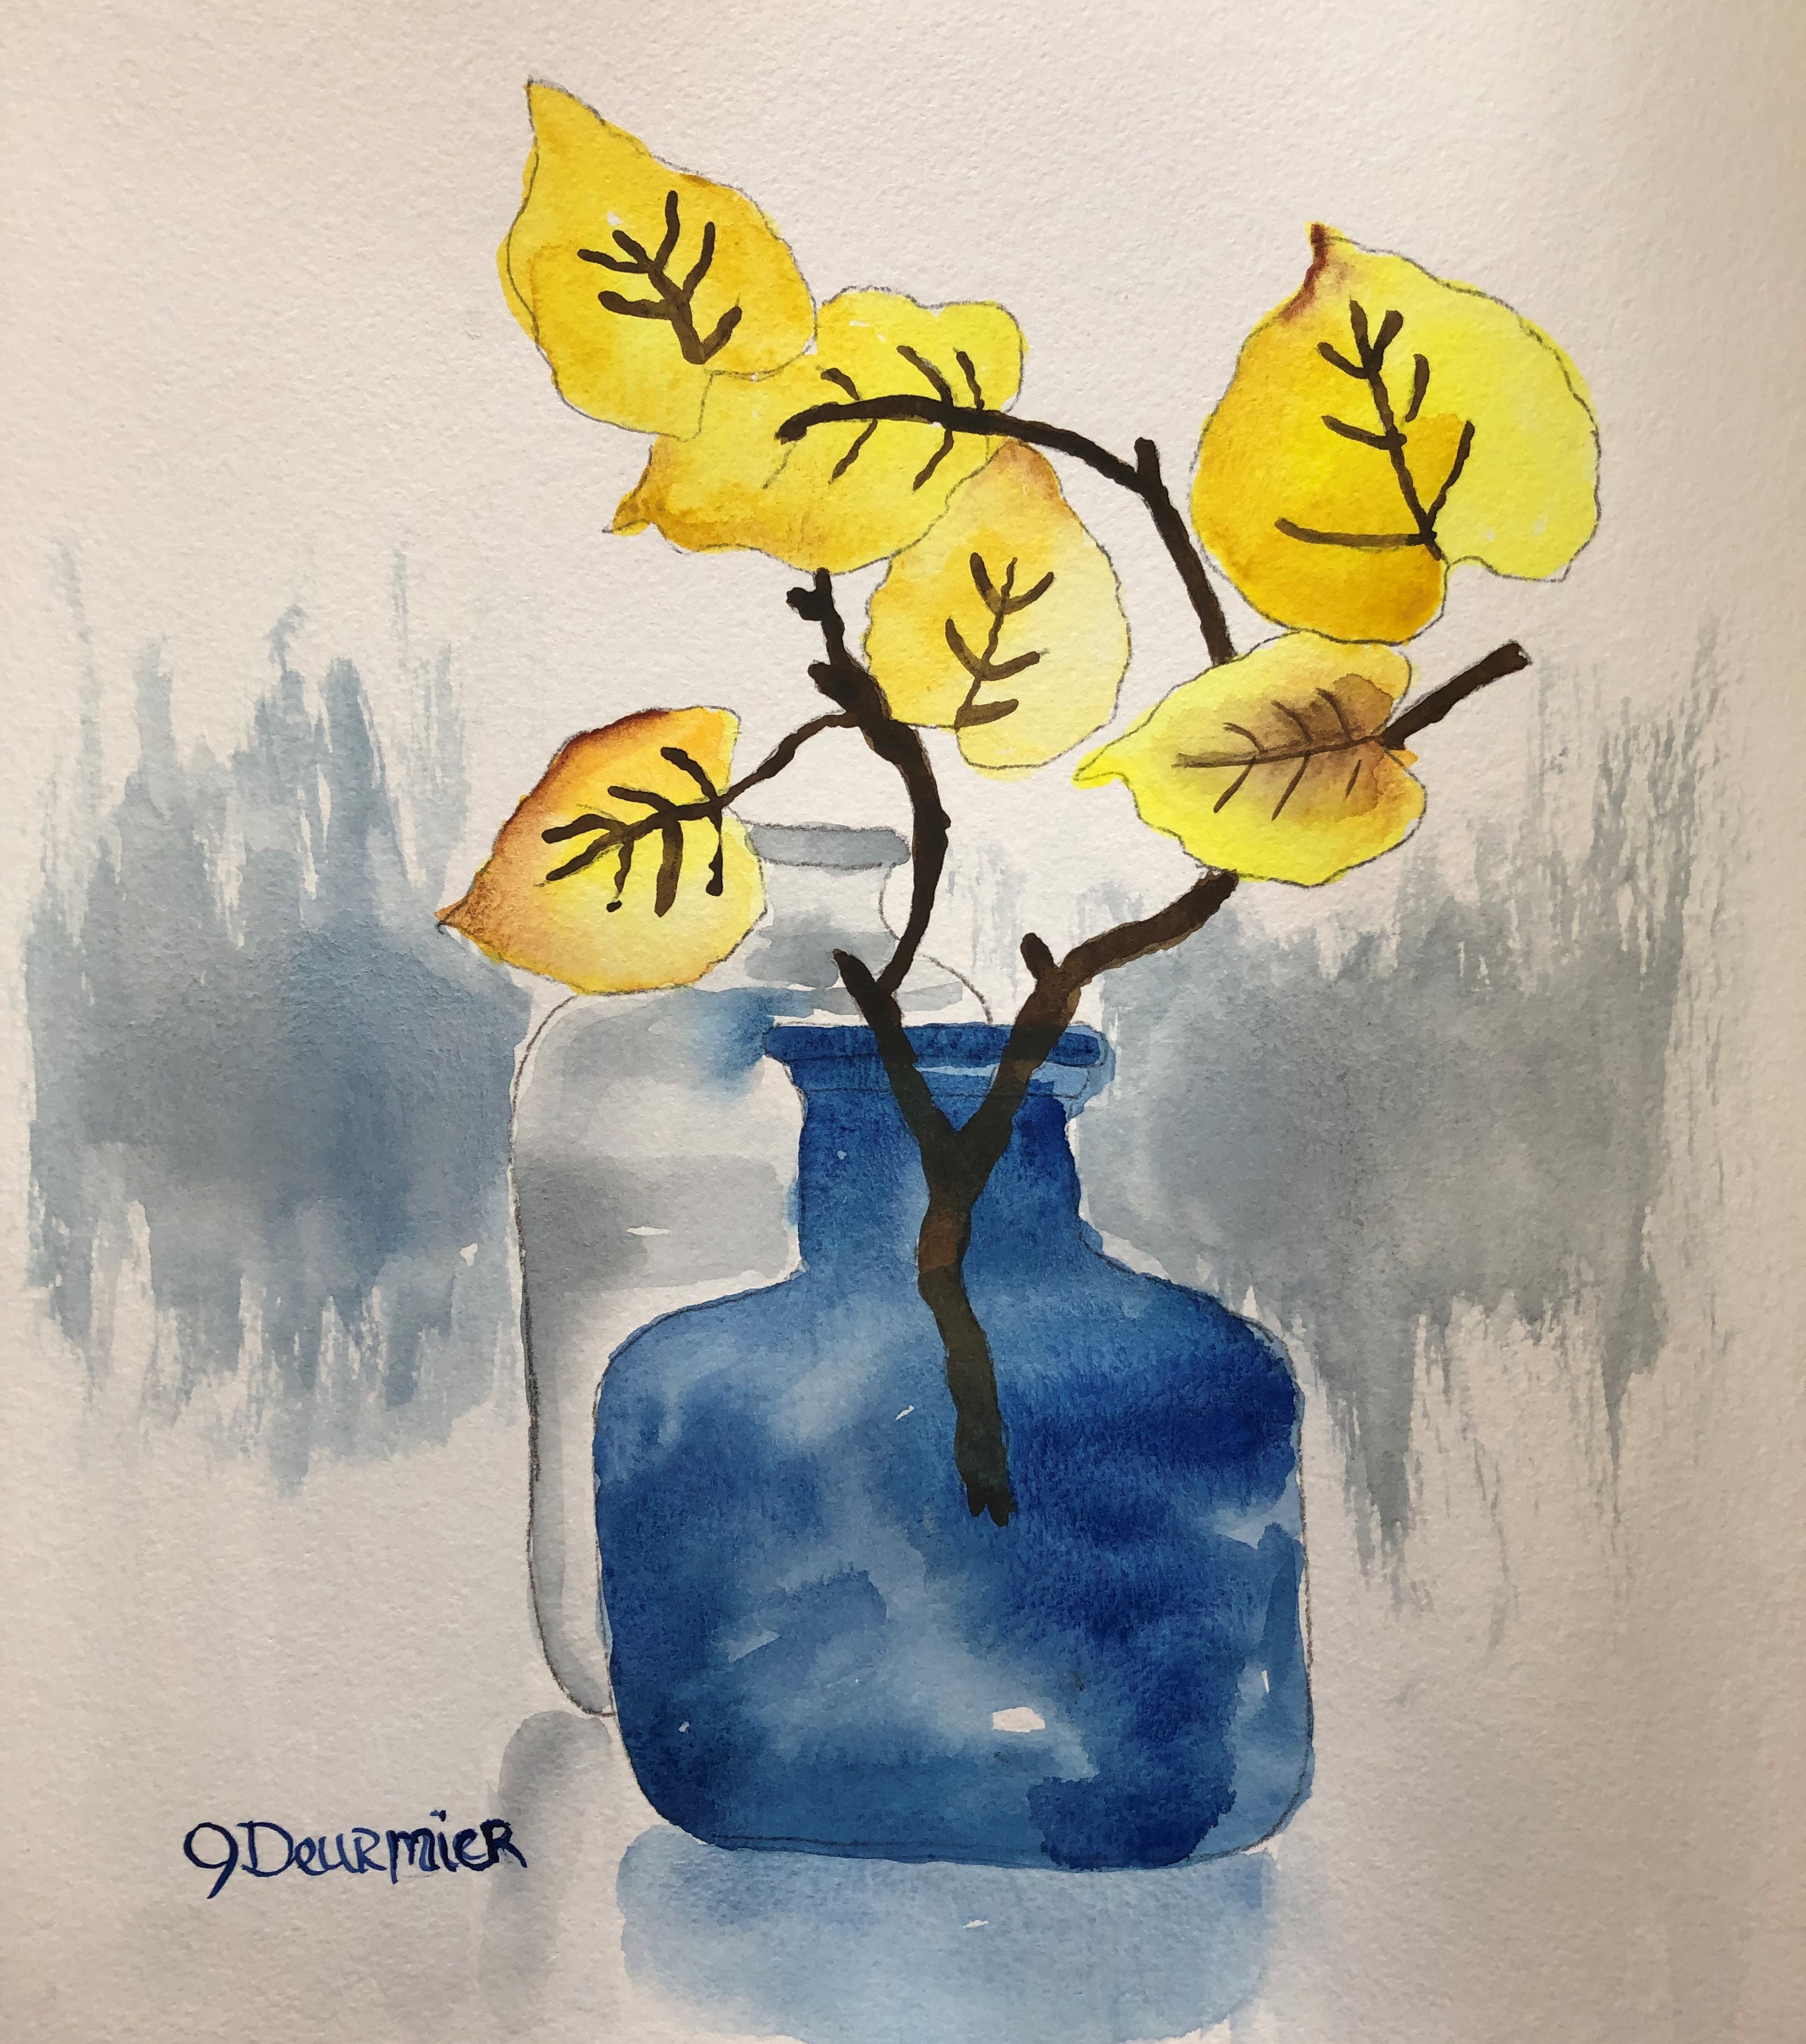 Watercolor painting of blue vase filled with yellow leaves